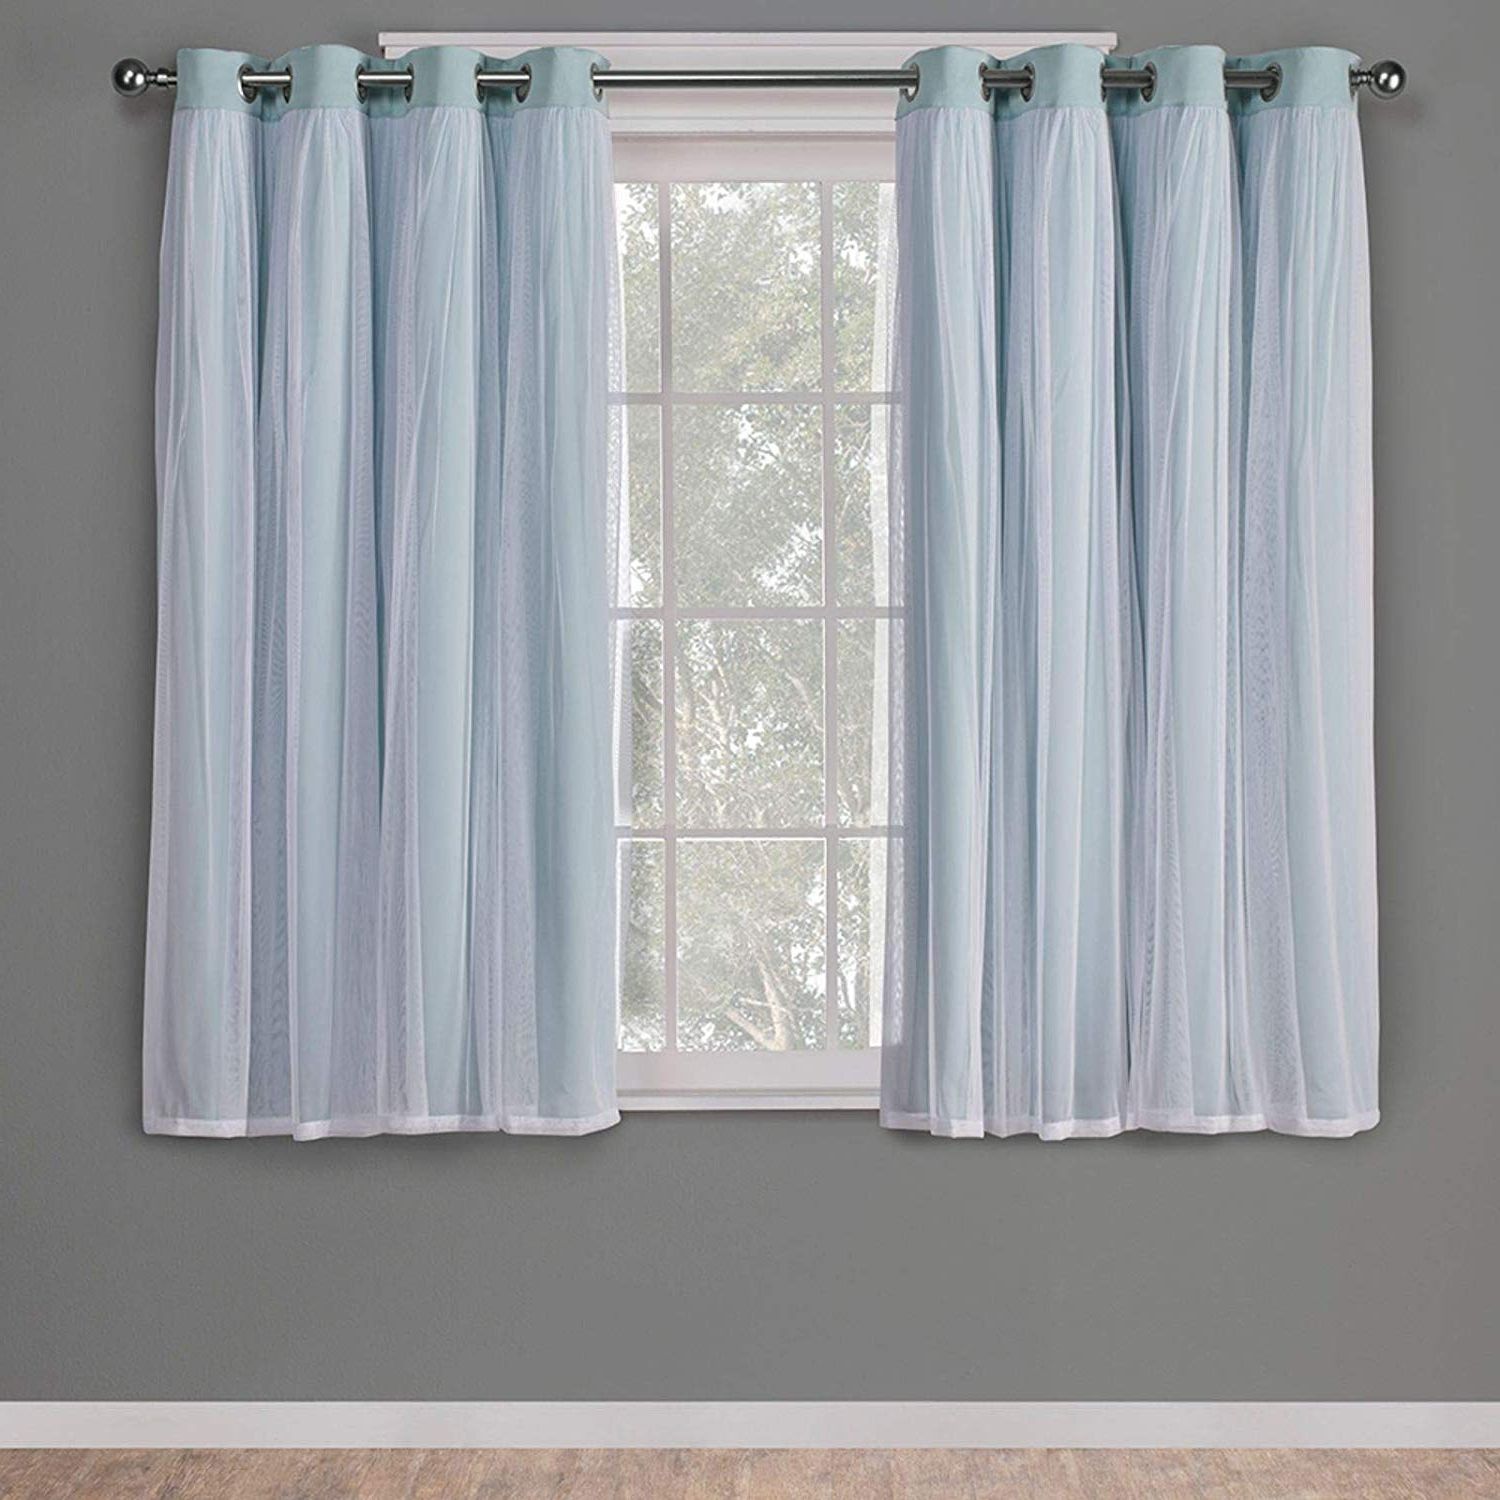 Latest Catarina Layered Curtain Panel Pairs With Grommet Top Within Exclusive Home Curtains Catarina Layered Solid Blackout And Sheer Window  Curtain Panel Pair With Grommet Top, 52x63, Aqua, 2 Piece (View 2 of 20)